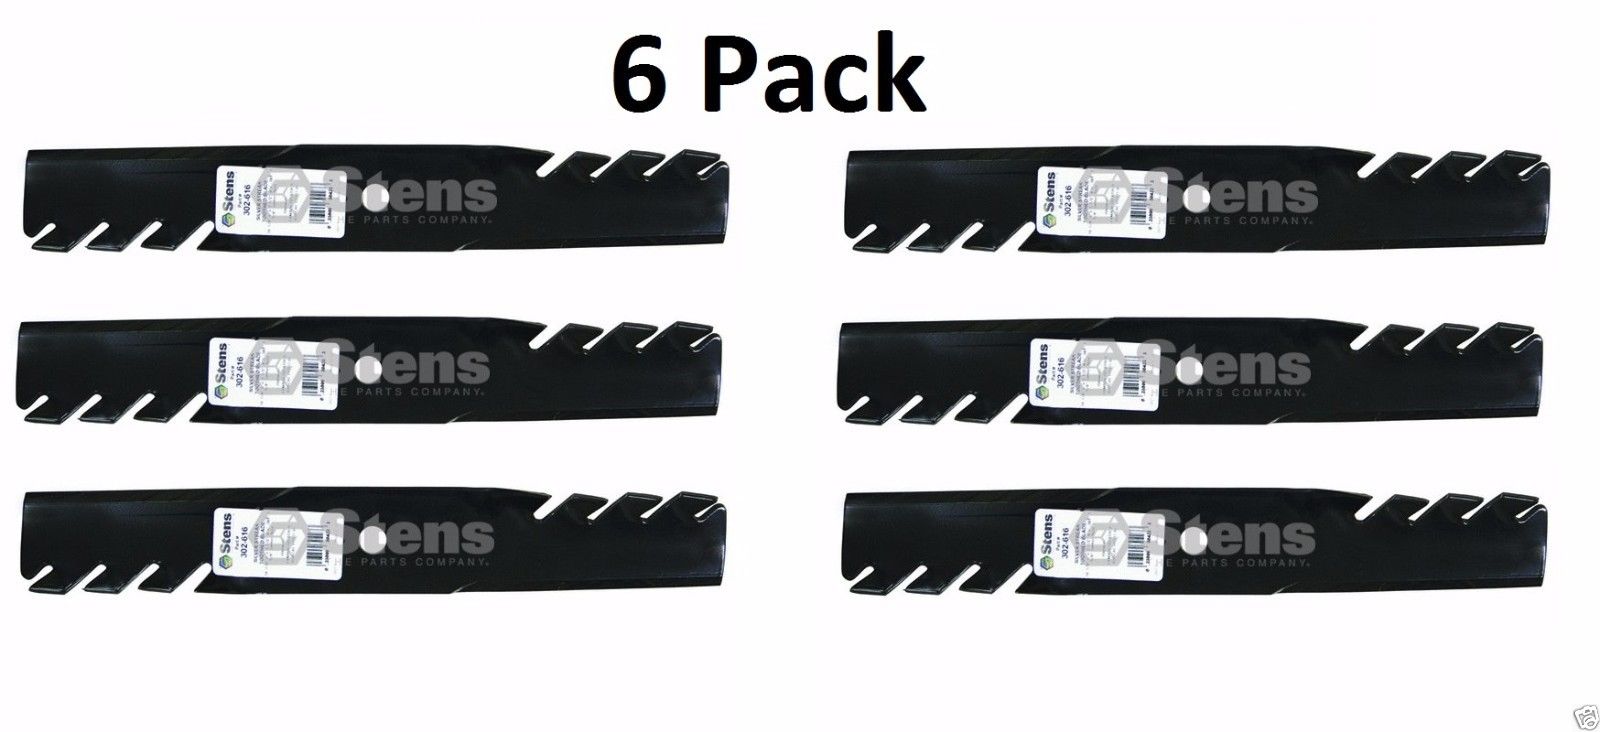 6 Pack Stens 302-616 Toothed Blade for Bobcat 03239 112111-01 2722543-01 32061